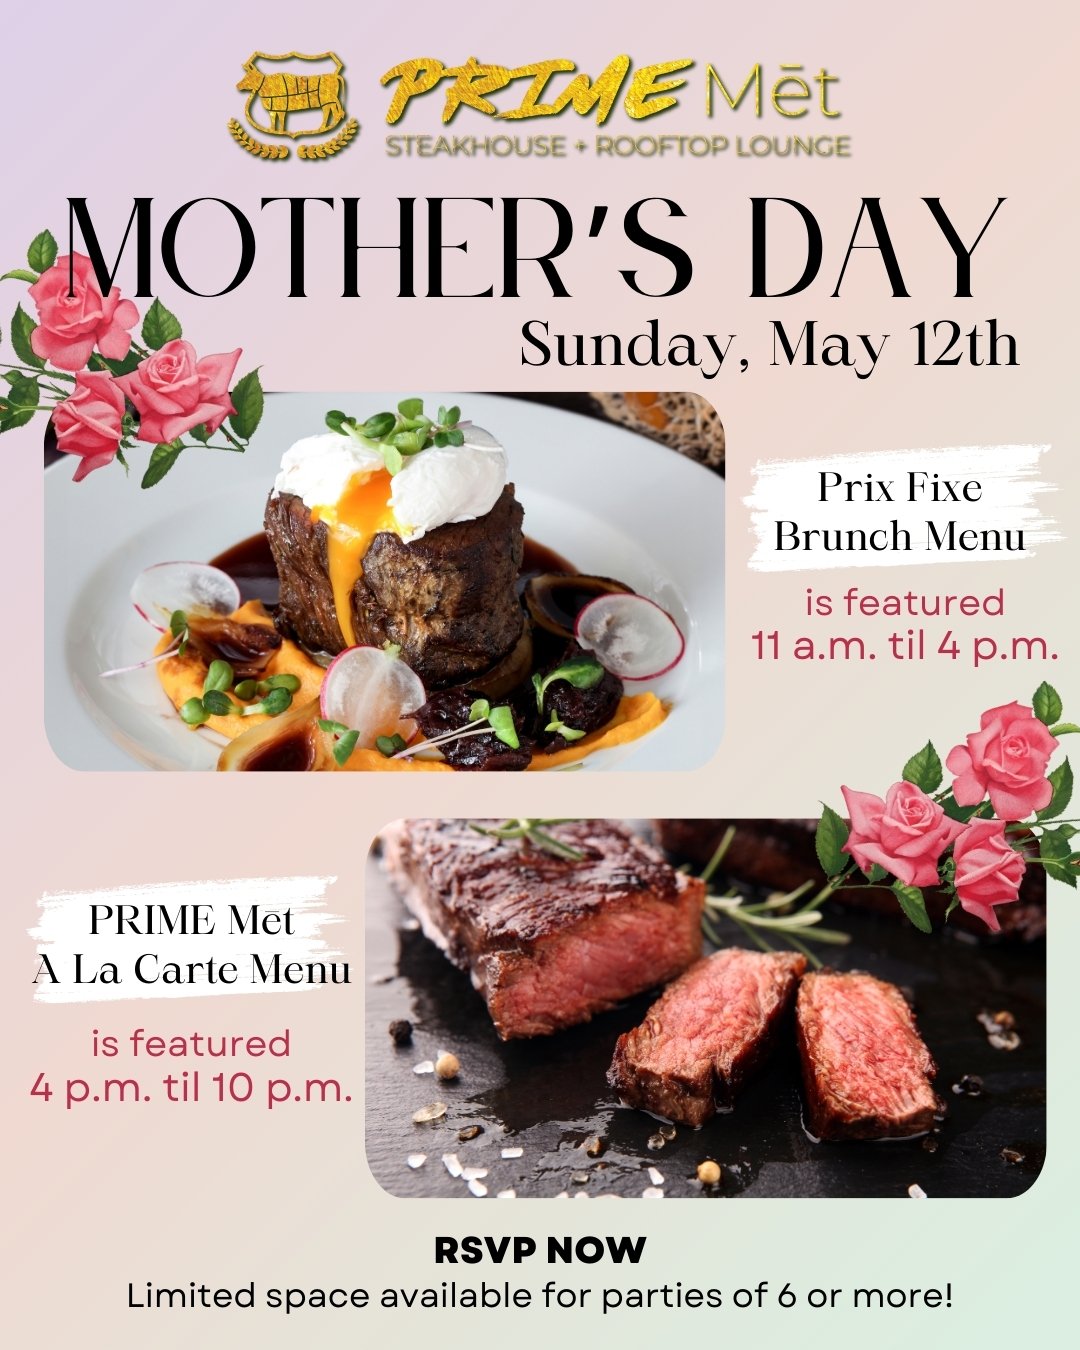 Join us on Sunday, May 12th, to celebrate Mother's Day! 🌷

Indulge in our Special Prix Fixe Brunch Menu from 11am to 4pm, or enjoy our regular PRIME Mēt A La Carte menu from 4pm to 10pm.. or BOTH!! Make your reservation on OpenTable now to treat Mom